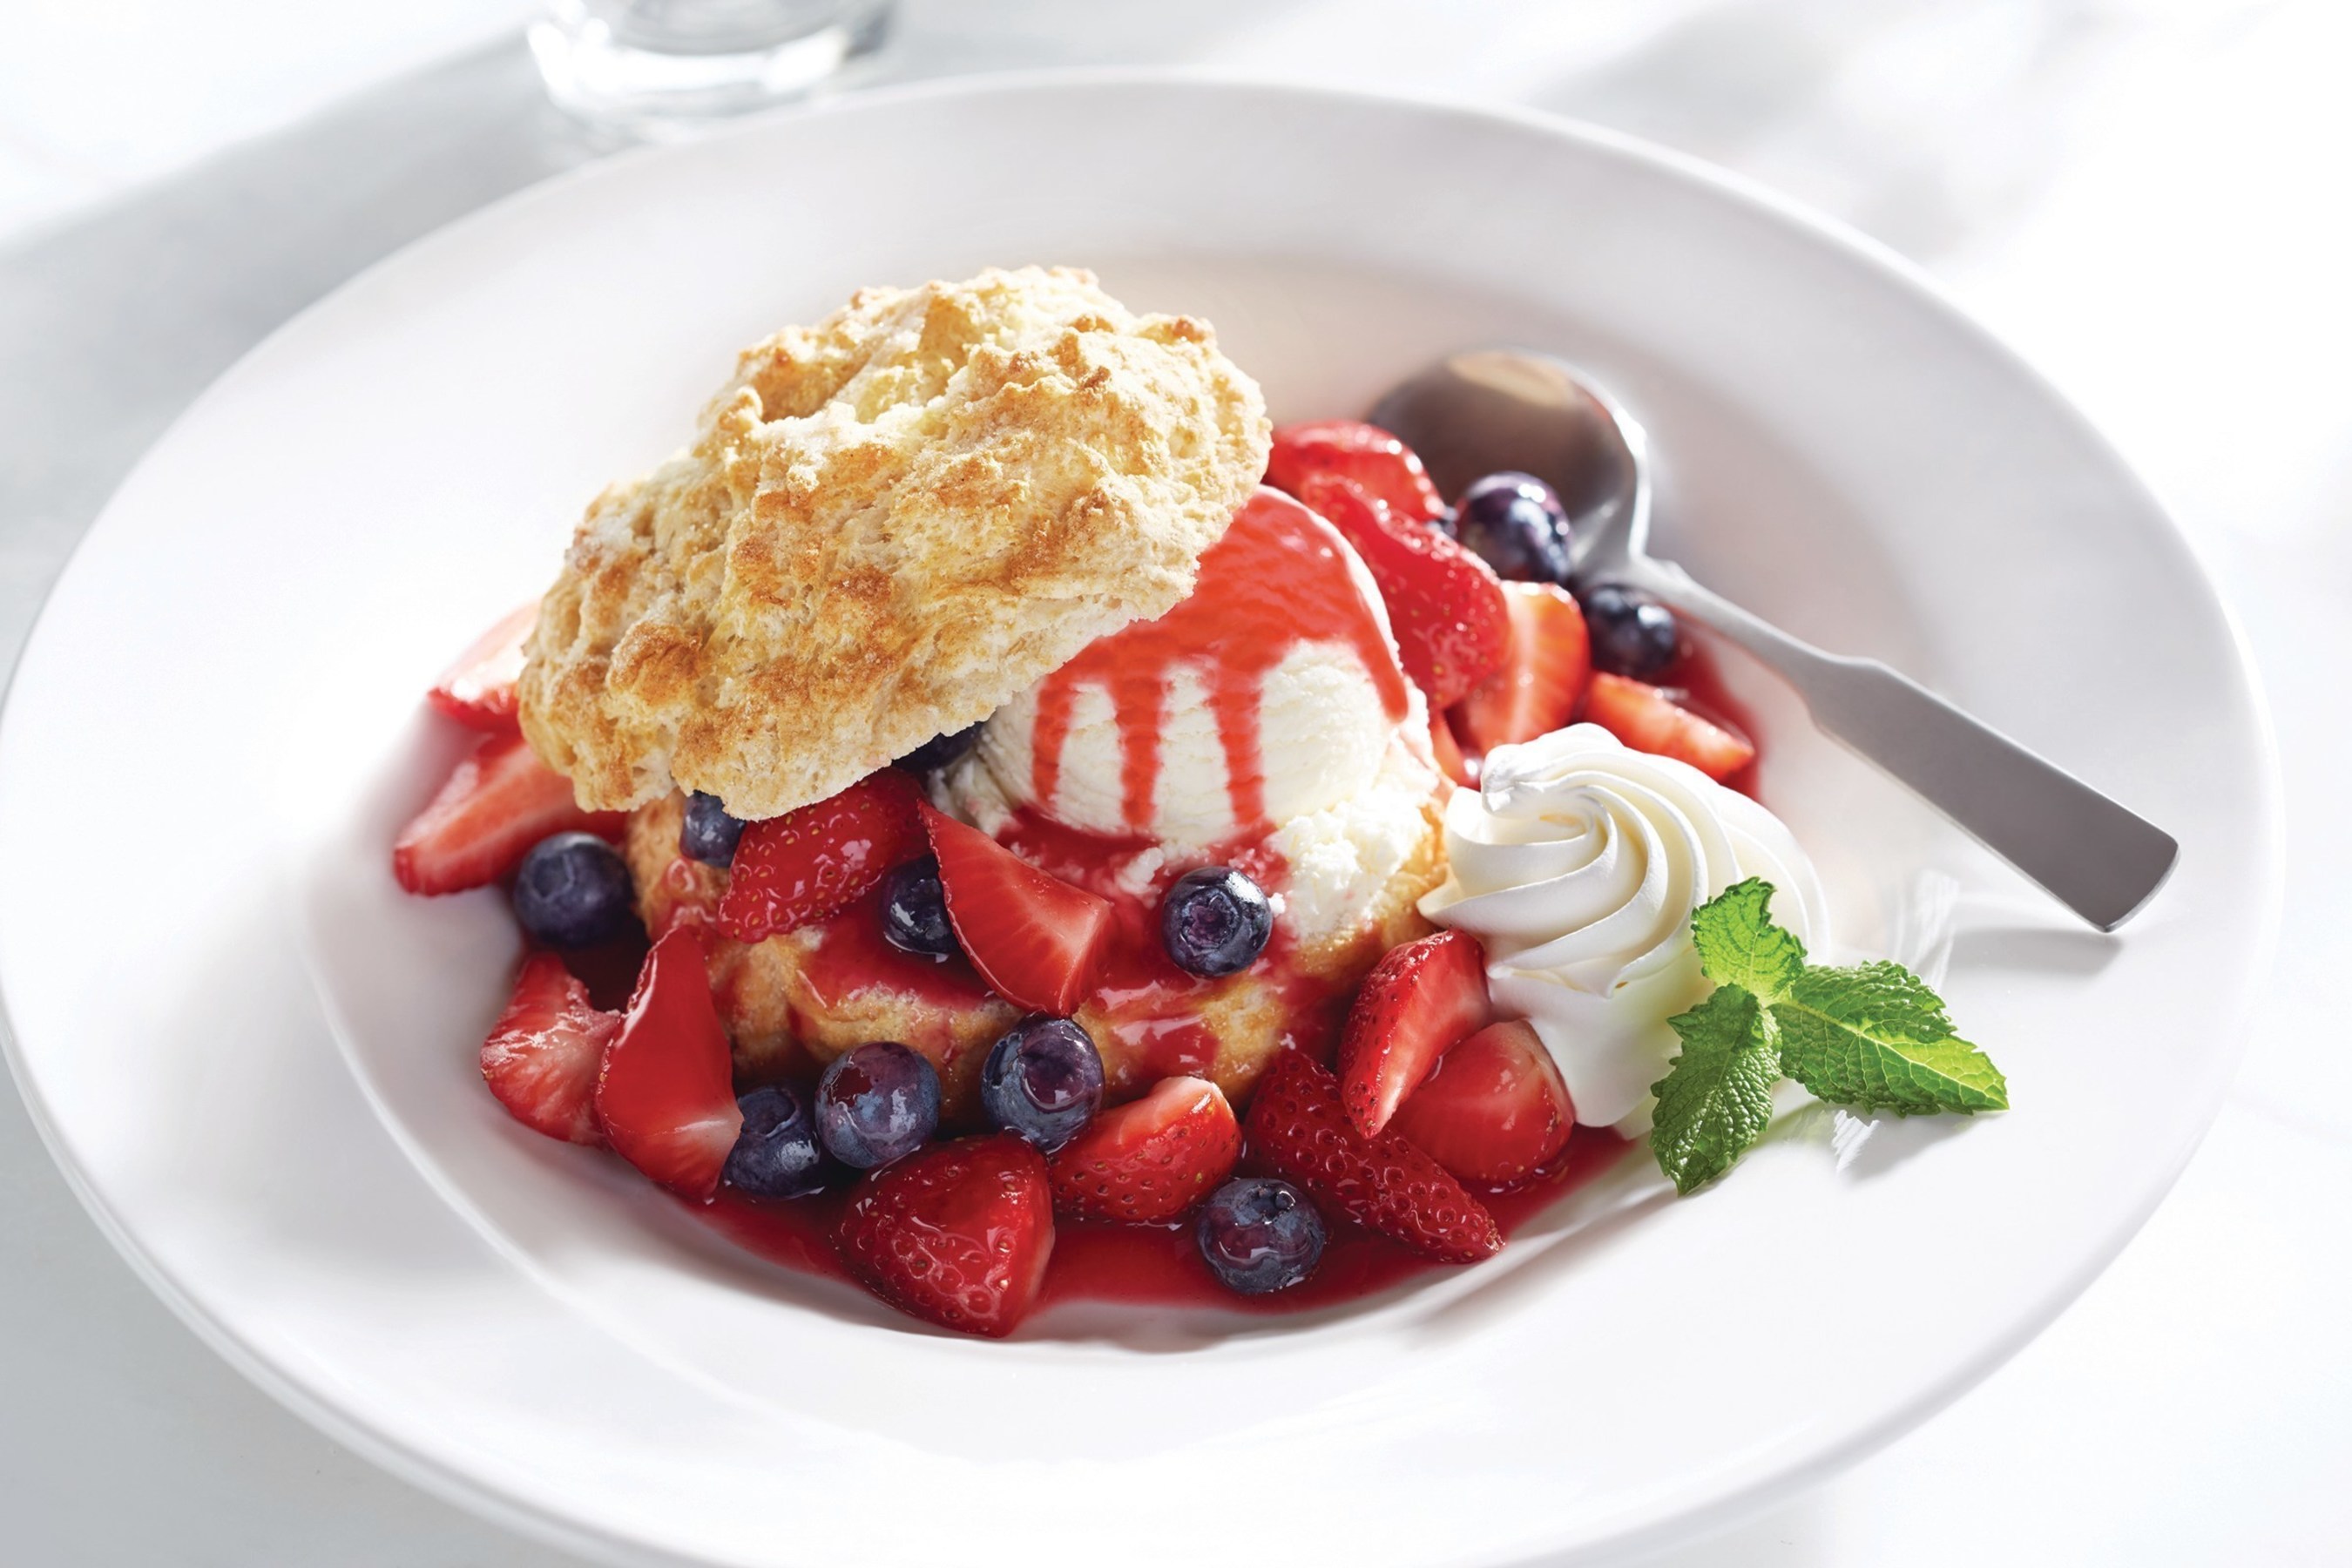 Red Lobster's new Homemade Berry Shore-Cake(TM) features a hand-crafted, light and buttery shortcake that's filled with summer's best berries - strawberries and blueberries - and served with vanilla ice cream.